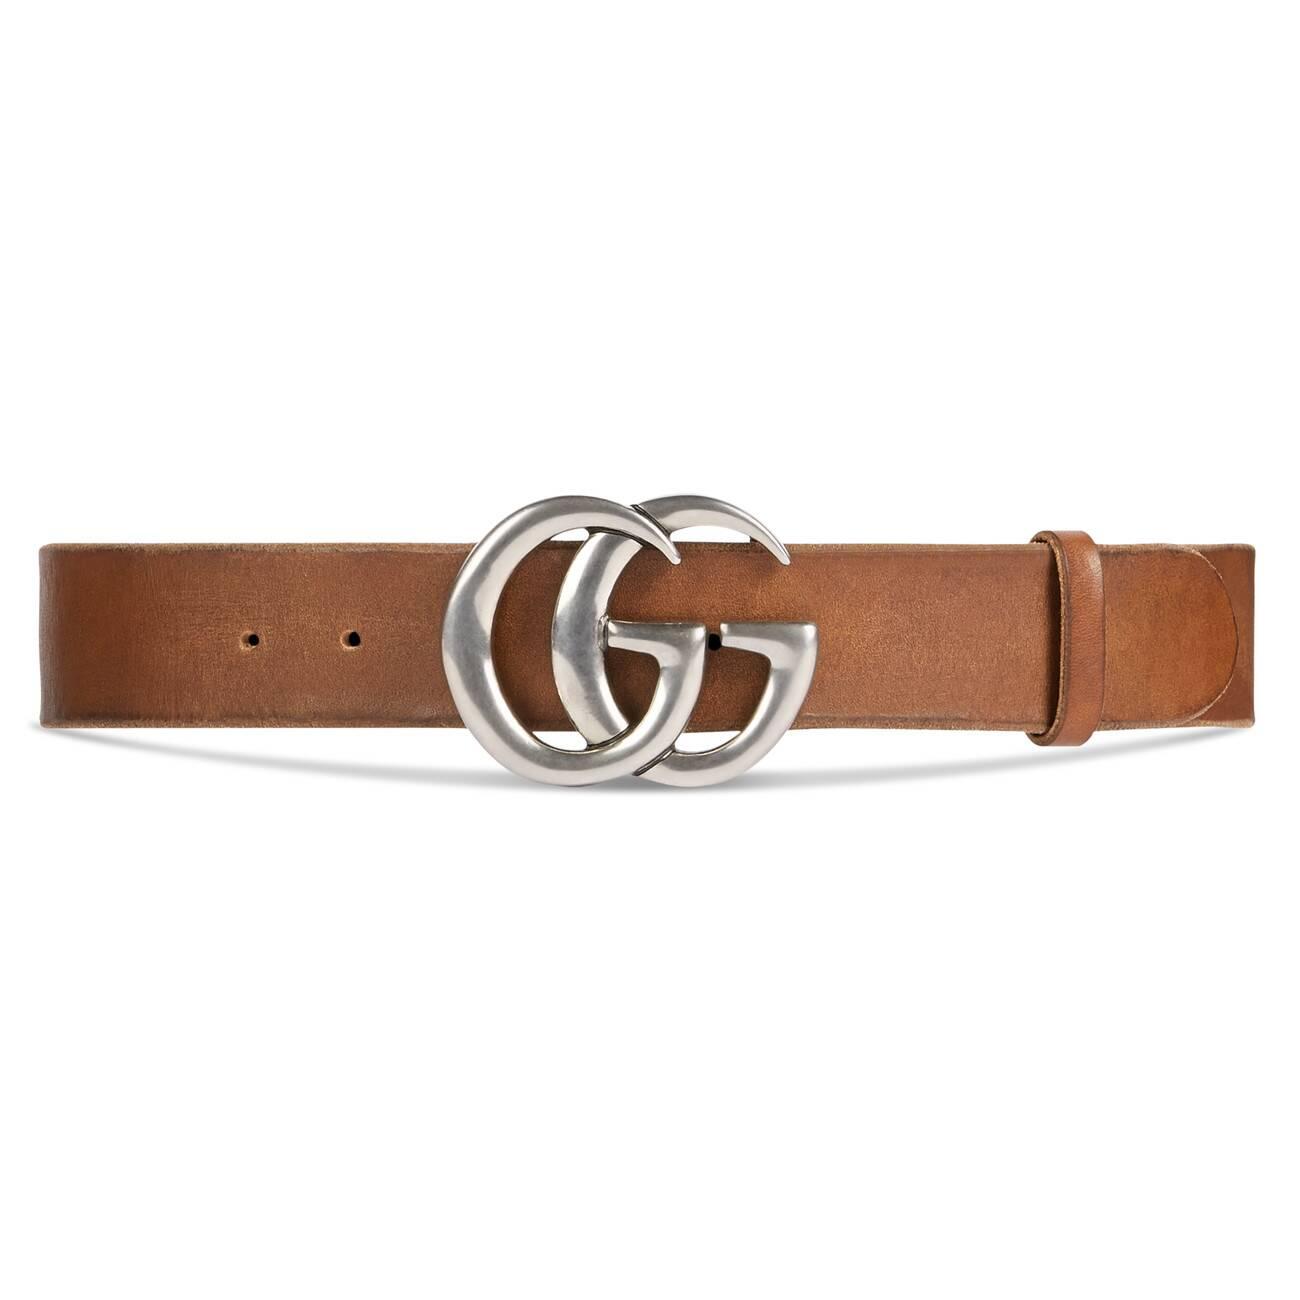 Gucci Leather Belt With Double G Buckle in Brown / Silver (Brown) for Men - Lyst